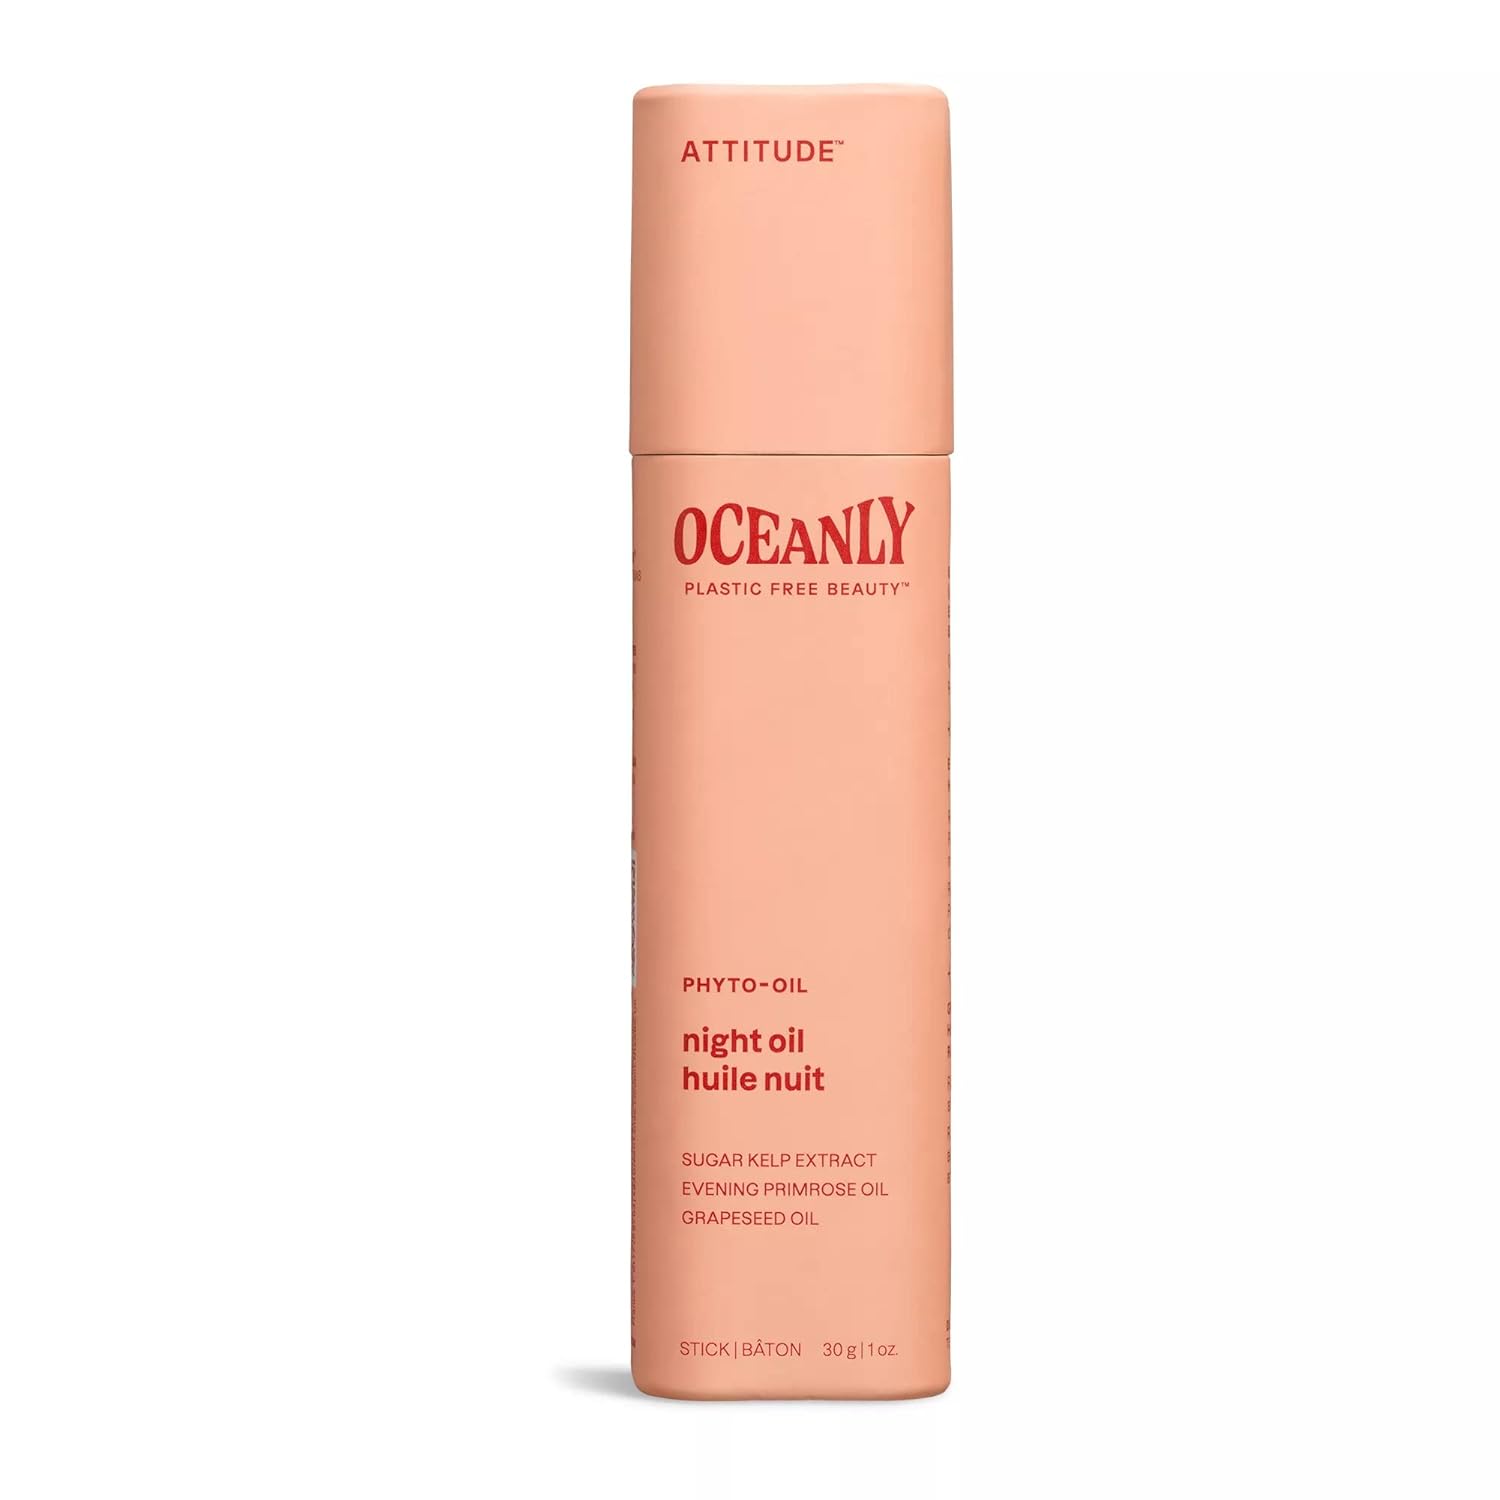 ATTITUDE Oceanly Night Oil Stick, EWG Verified, Plastic-free, Plant and Mineral-Based Ingredients, Vegan and Cruelty-free Beauty Products, PHYTO OIL, Unscented, 1 Ounce